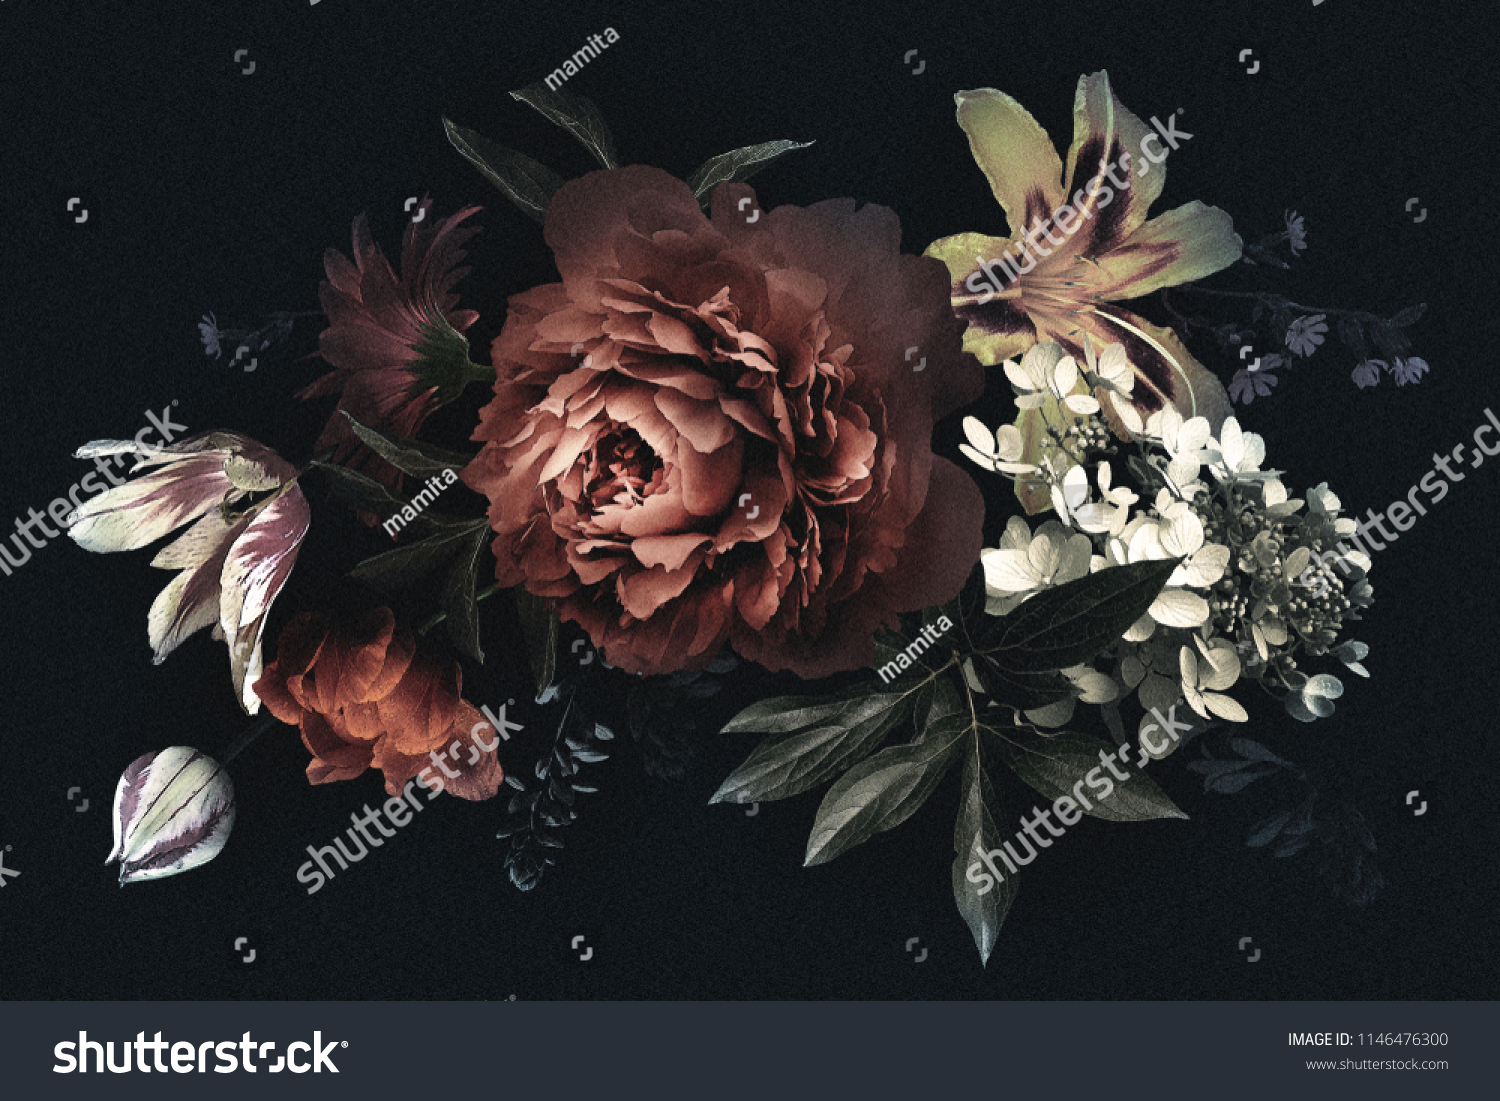 Floral vintage card with flowers. Peonies, tulips, lily, hydrangea on black background.  Template for design of wedding invitations, holiday greetings, business card, decoration packaging #1146476300